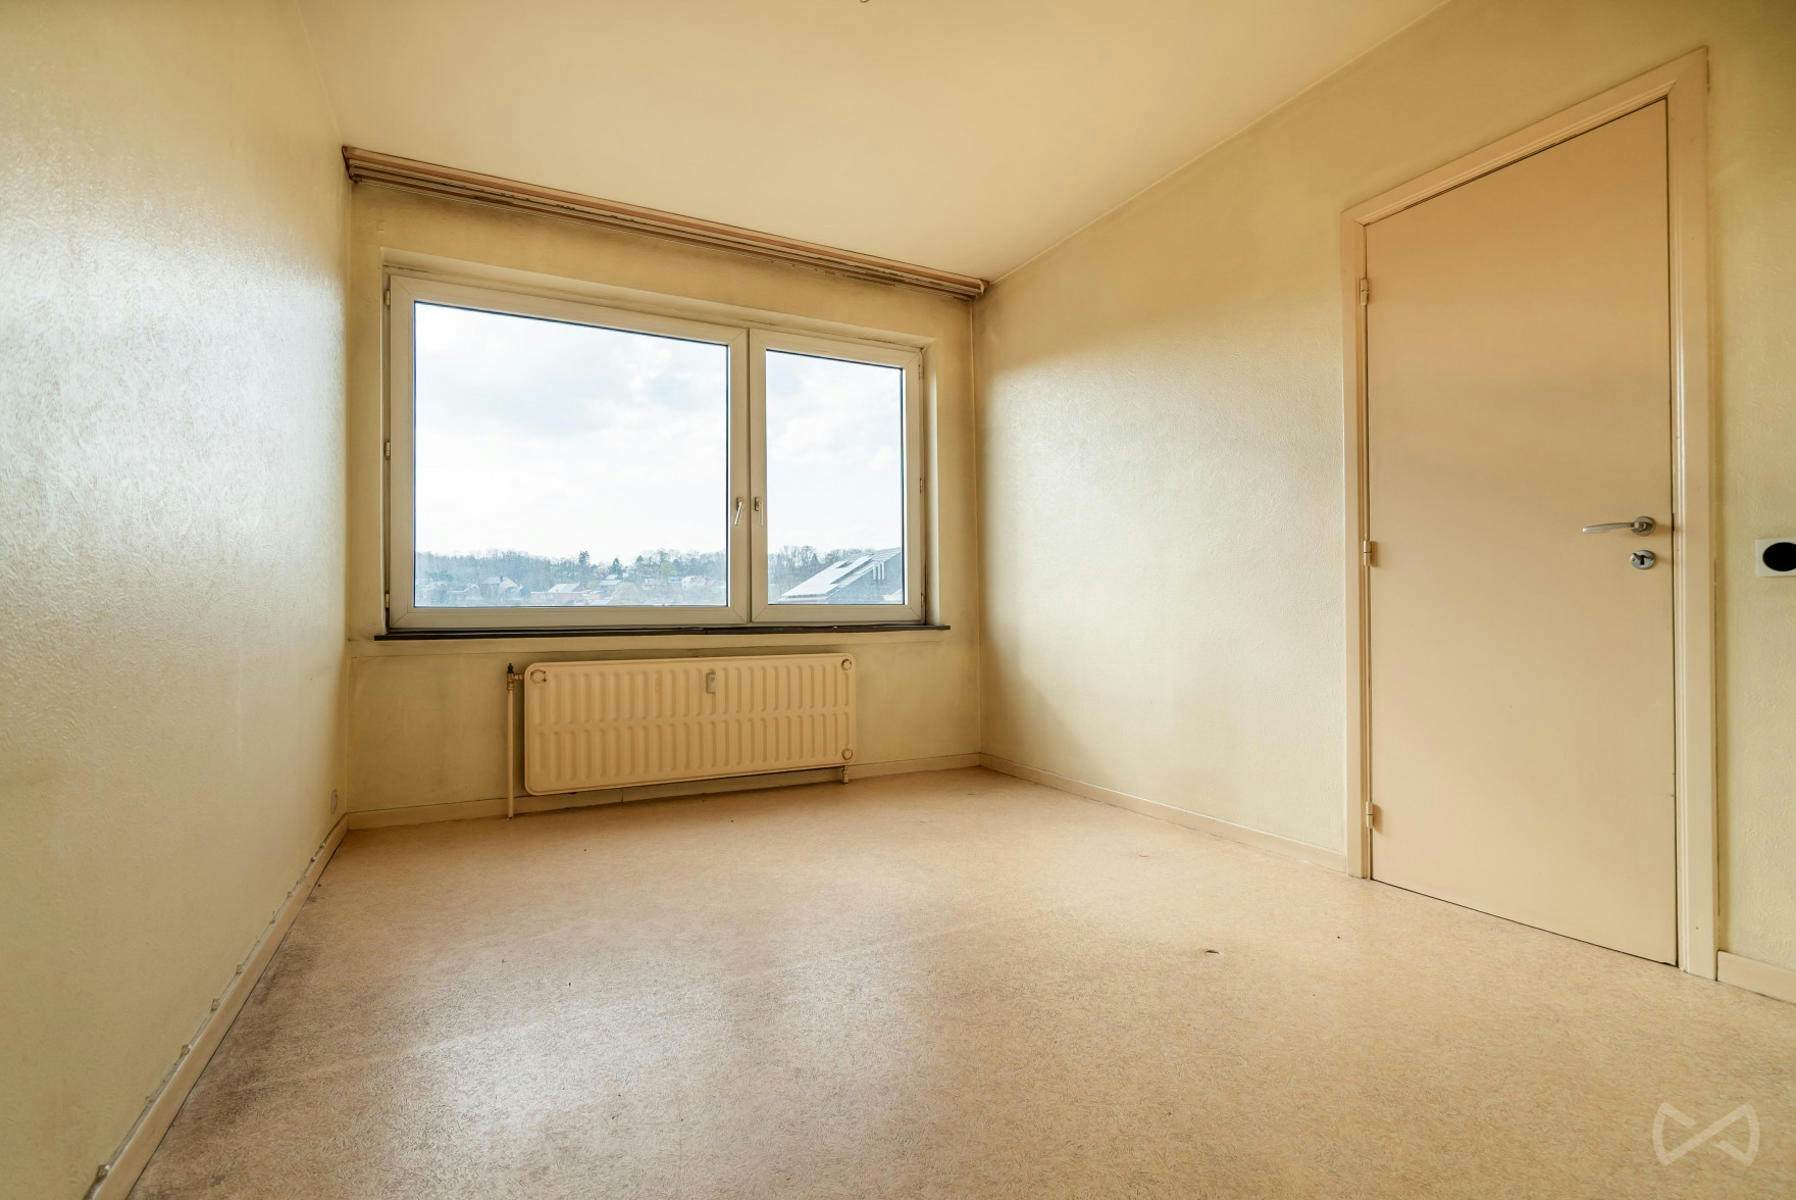 Picture 3 of 4 for Flat with two bedrooms in Liège